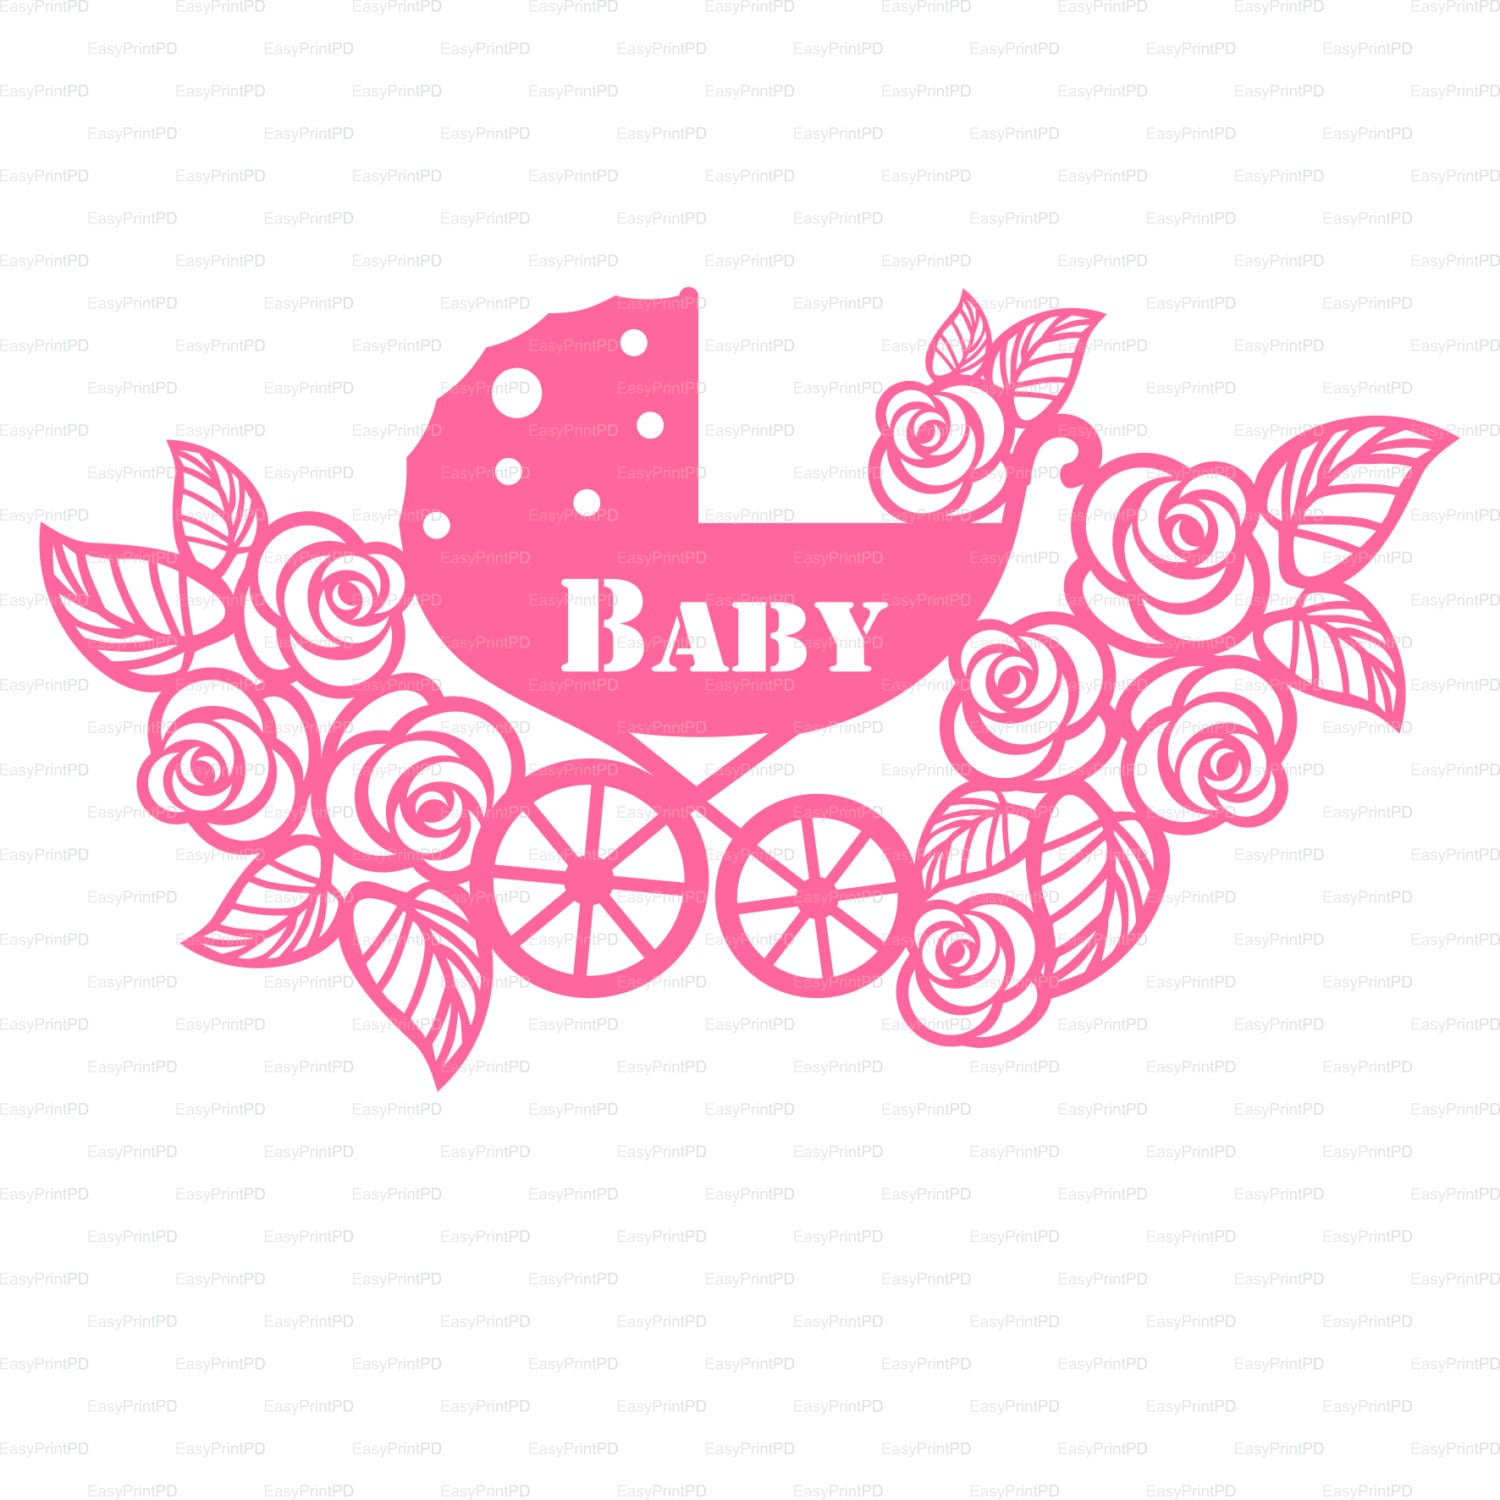 Download Newborn Card baby carriage buggy flowers lace svg dxf ai